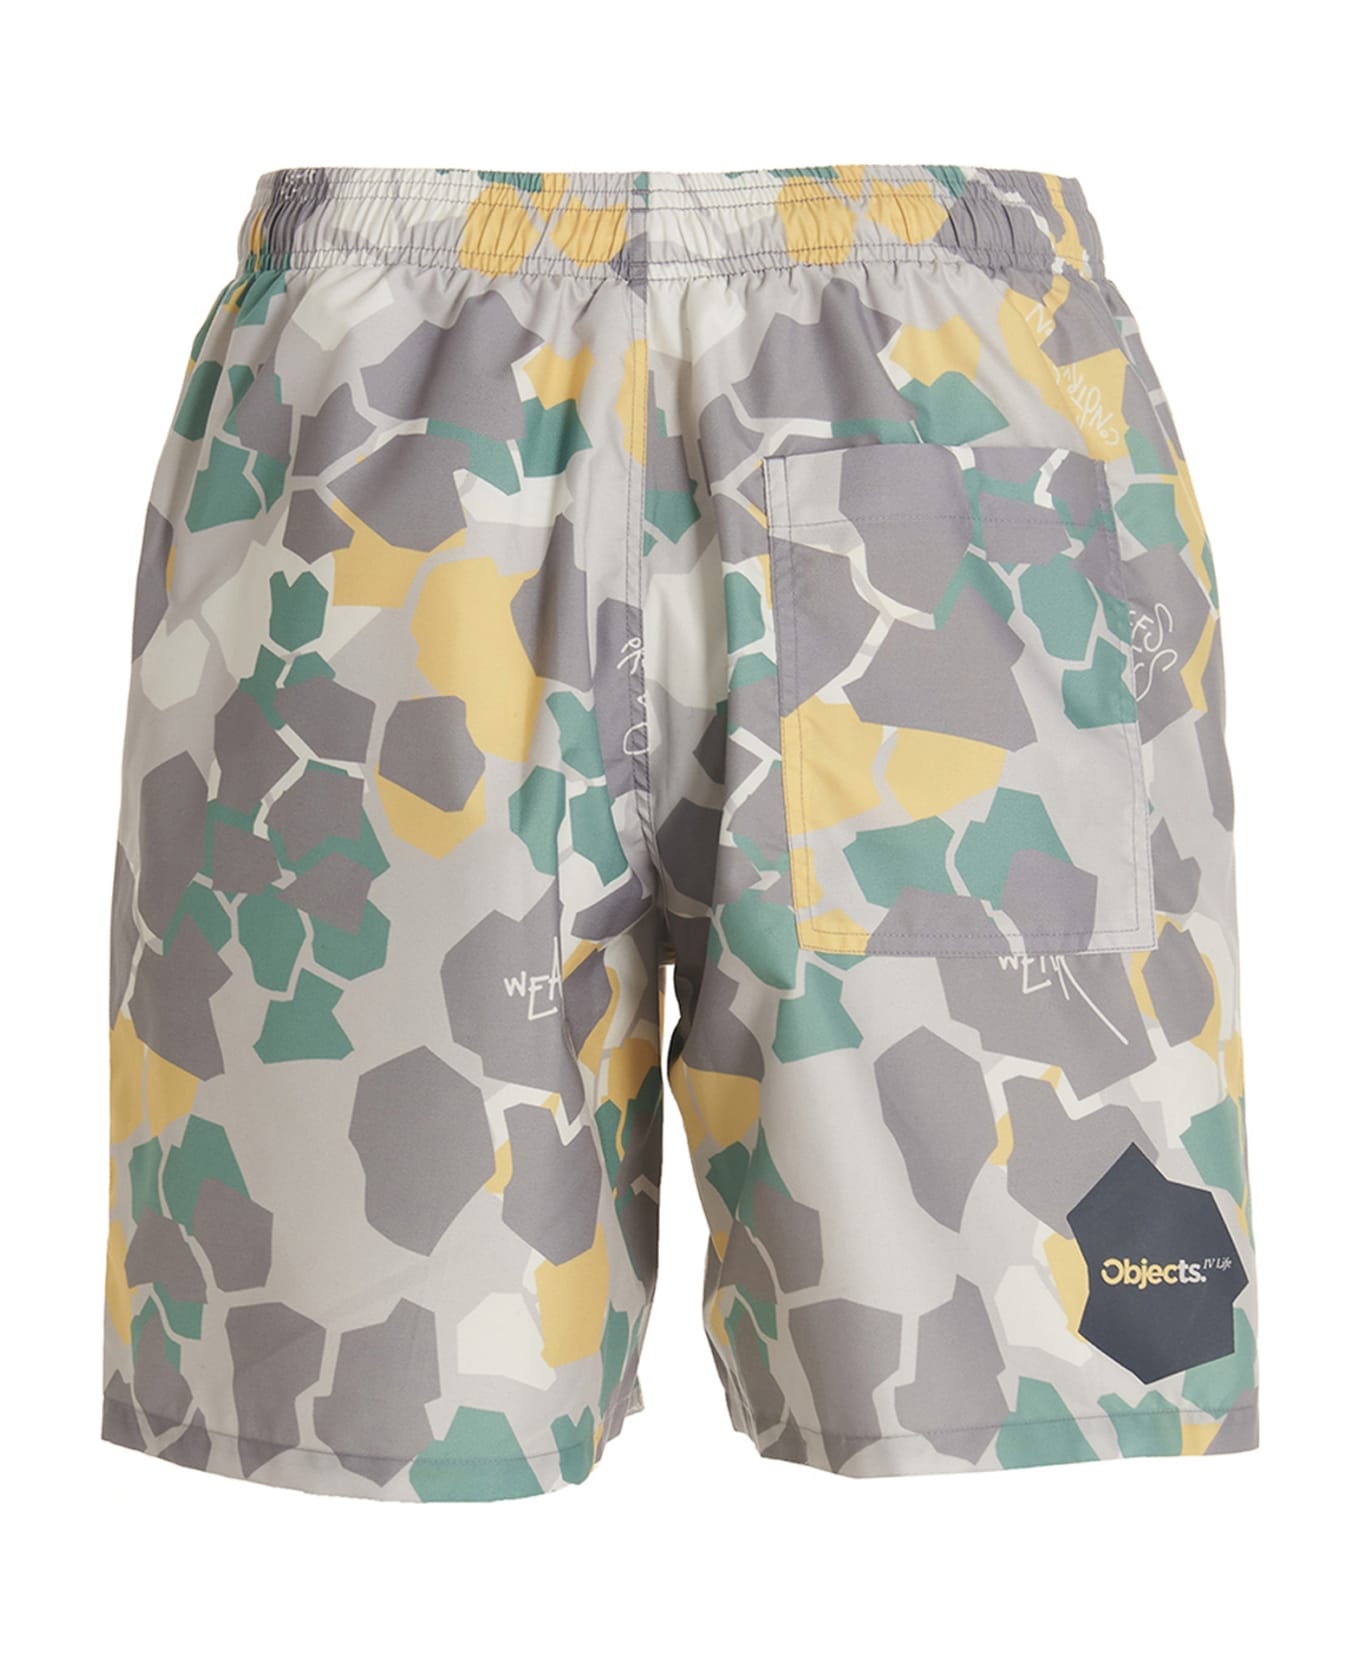 Objects Iv Life Printed Beach Shorts - Multicolor